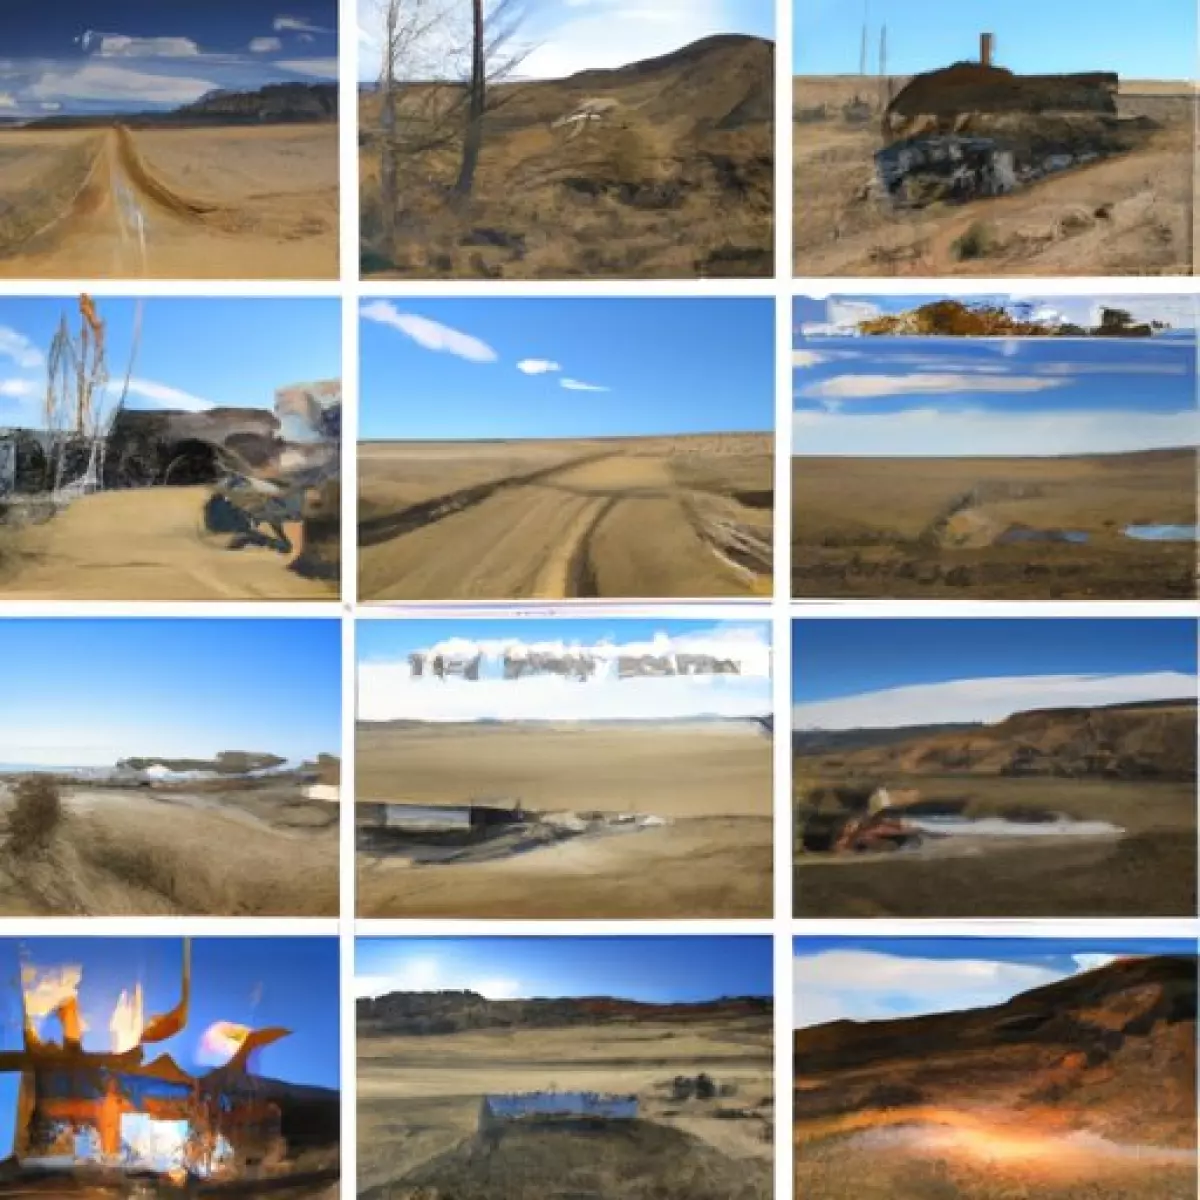 Overview of the Filming Locations for Open Range